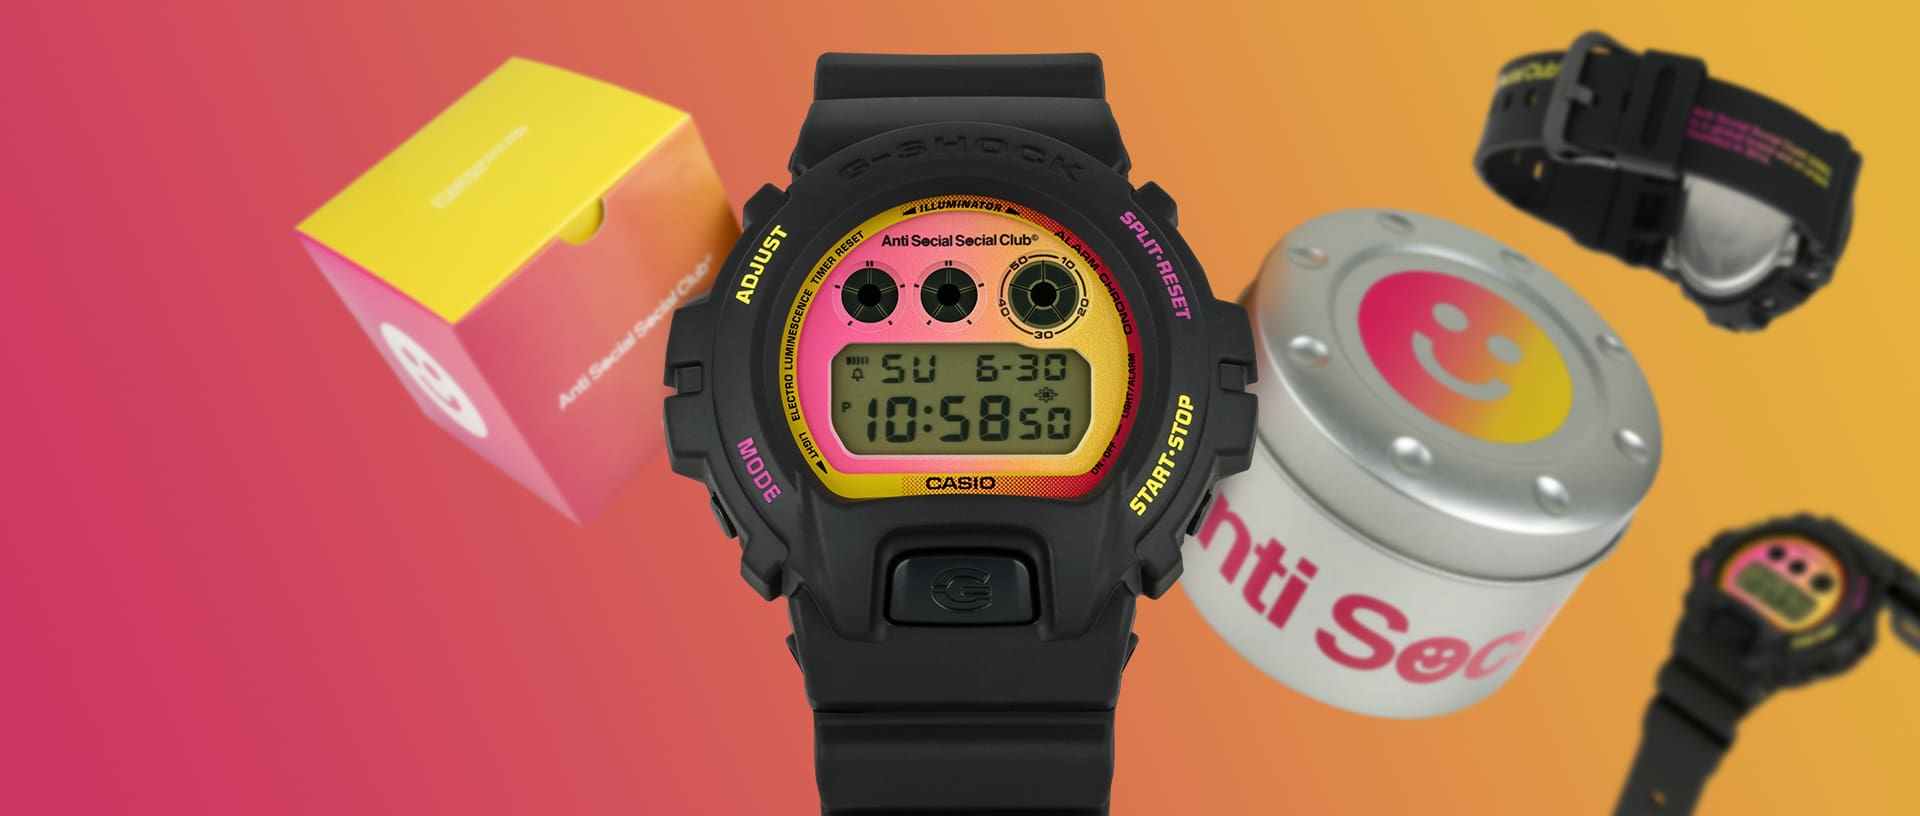 DW6900ASSC23-1 G-SHOCK ANTI SOCIAL SOCIAL CLUB Collaboration watch with with a pink to orange gradient background, also displaying packaging and different angles of the watch